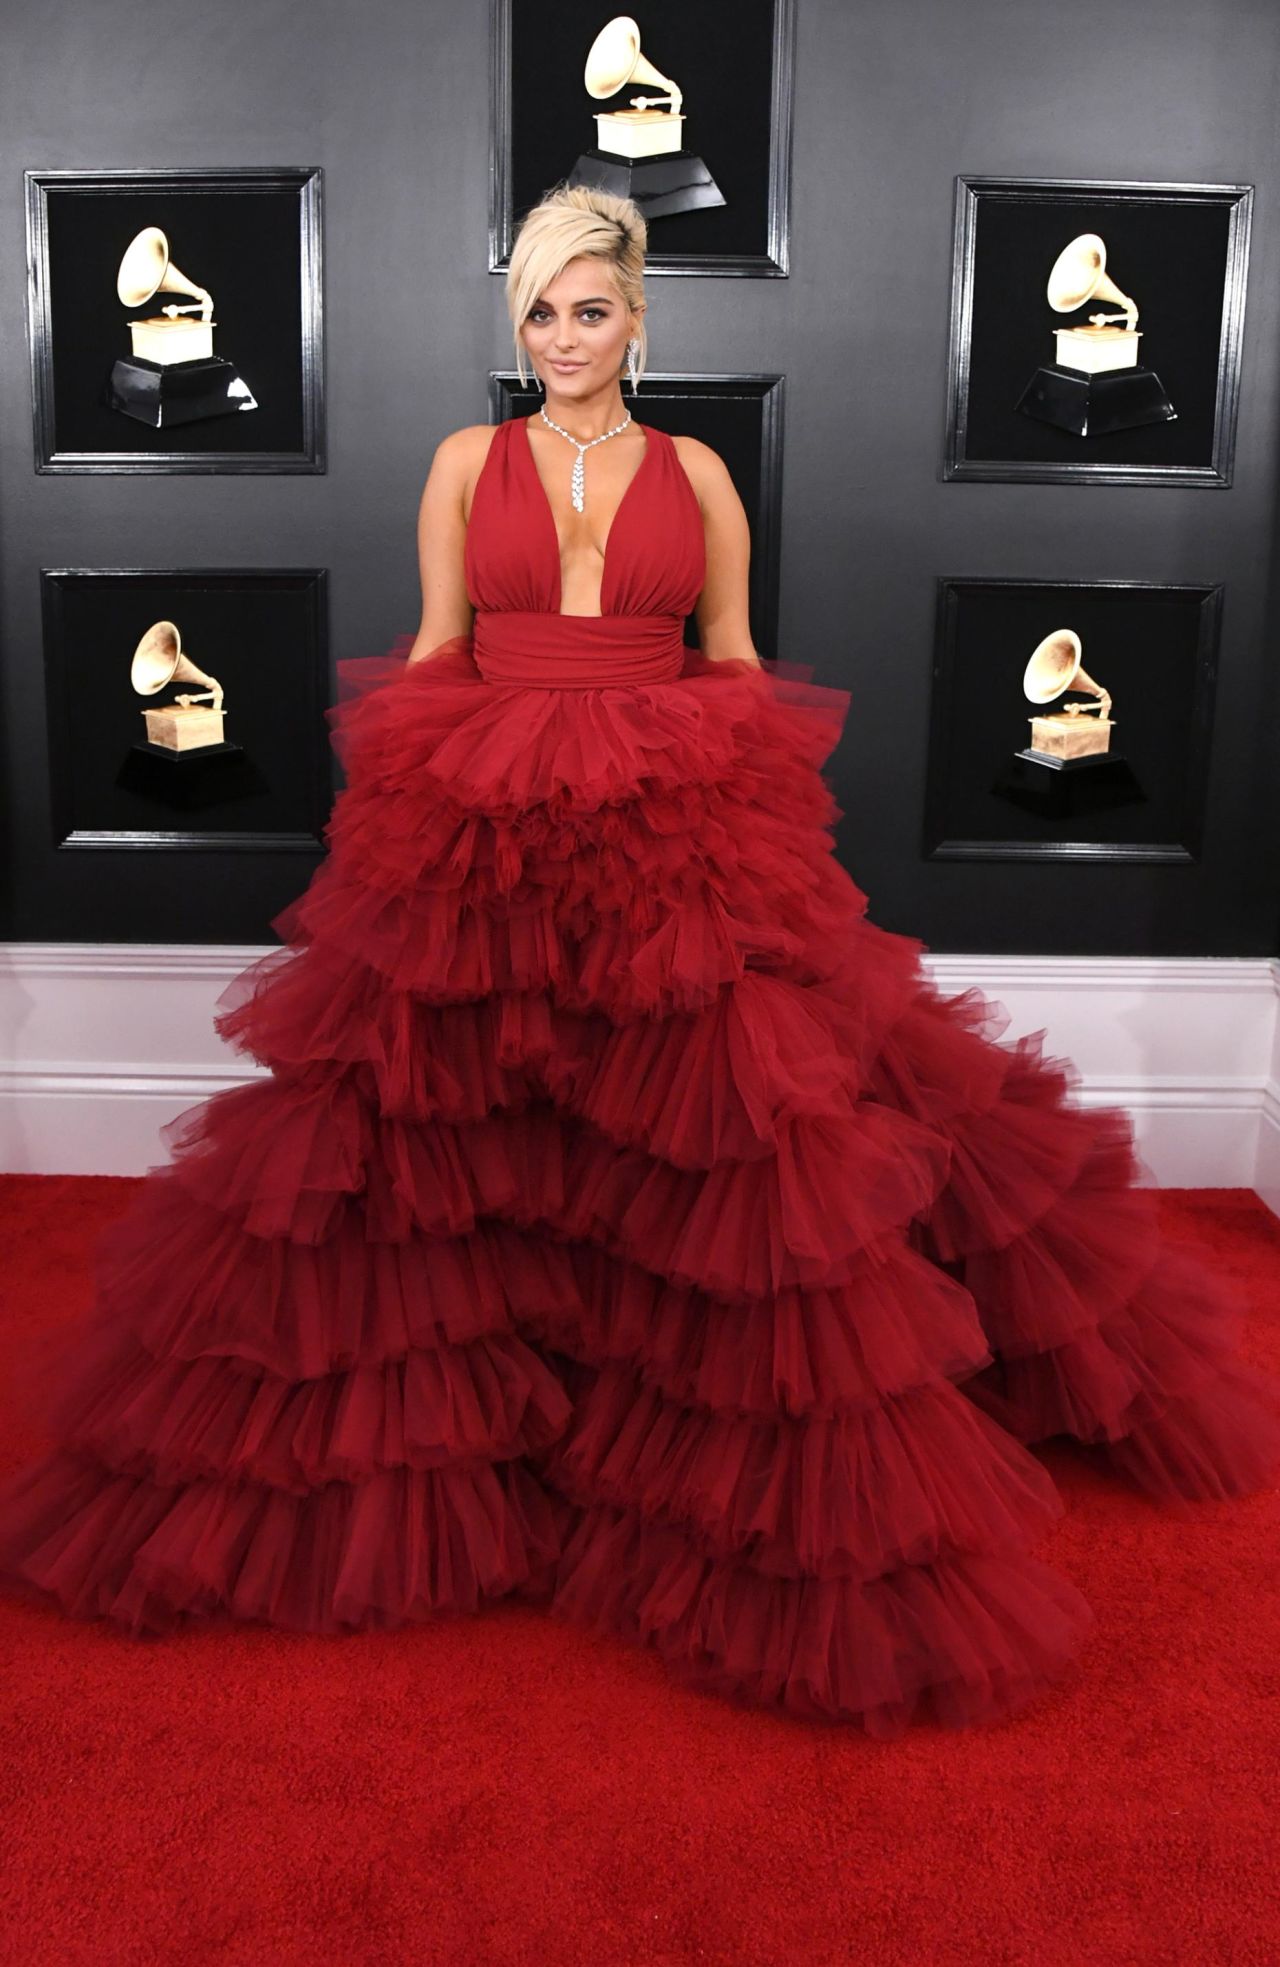 Bebe Rexha chose a ruffled ball gown for the red carpet. in January, one of Rexha's Instagram posts went viral after she called out designers who refused to dress her because she's "too big."